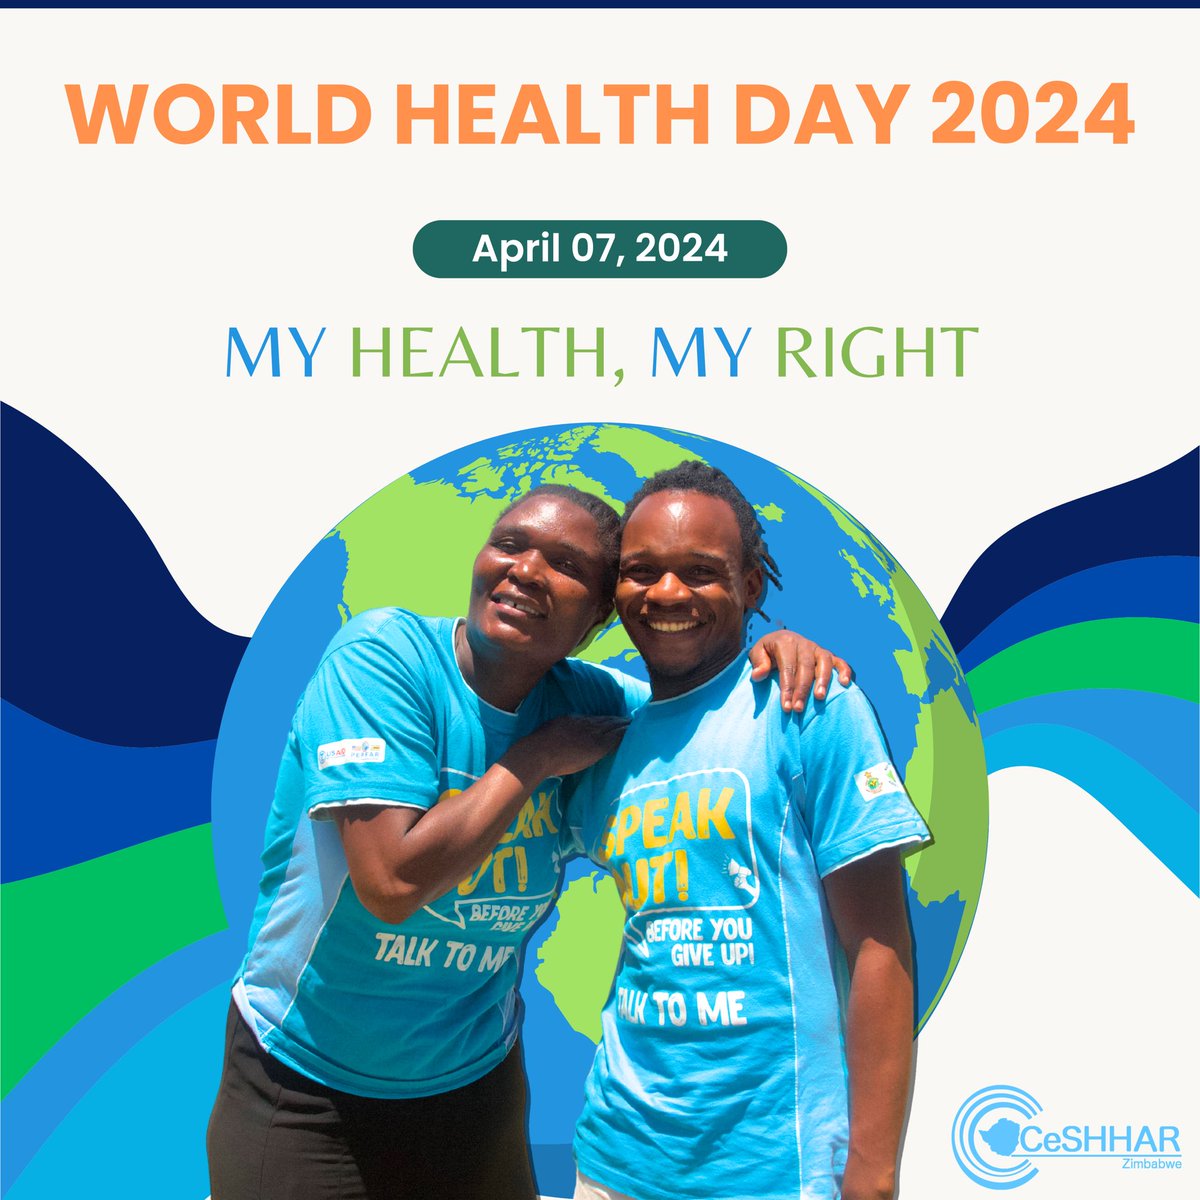 Everyone, everywhere has a right to access quality healthcare and education. This is highlighted in this year’s #worldhealthday theme, “My Health, My Right”. CeSHHAR believes the right to health is at the core of well being. We are committed to inclusive health services to all.